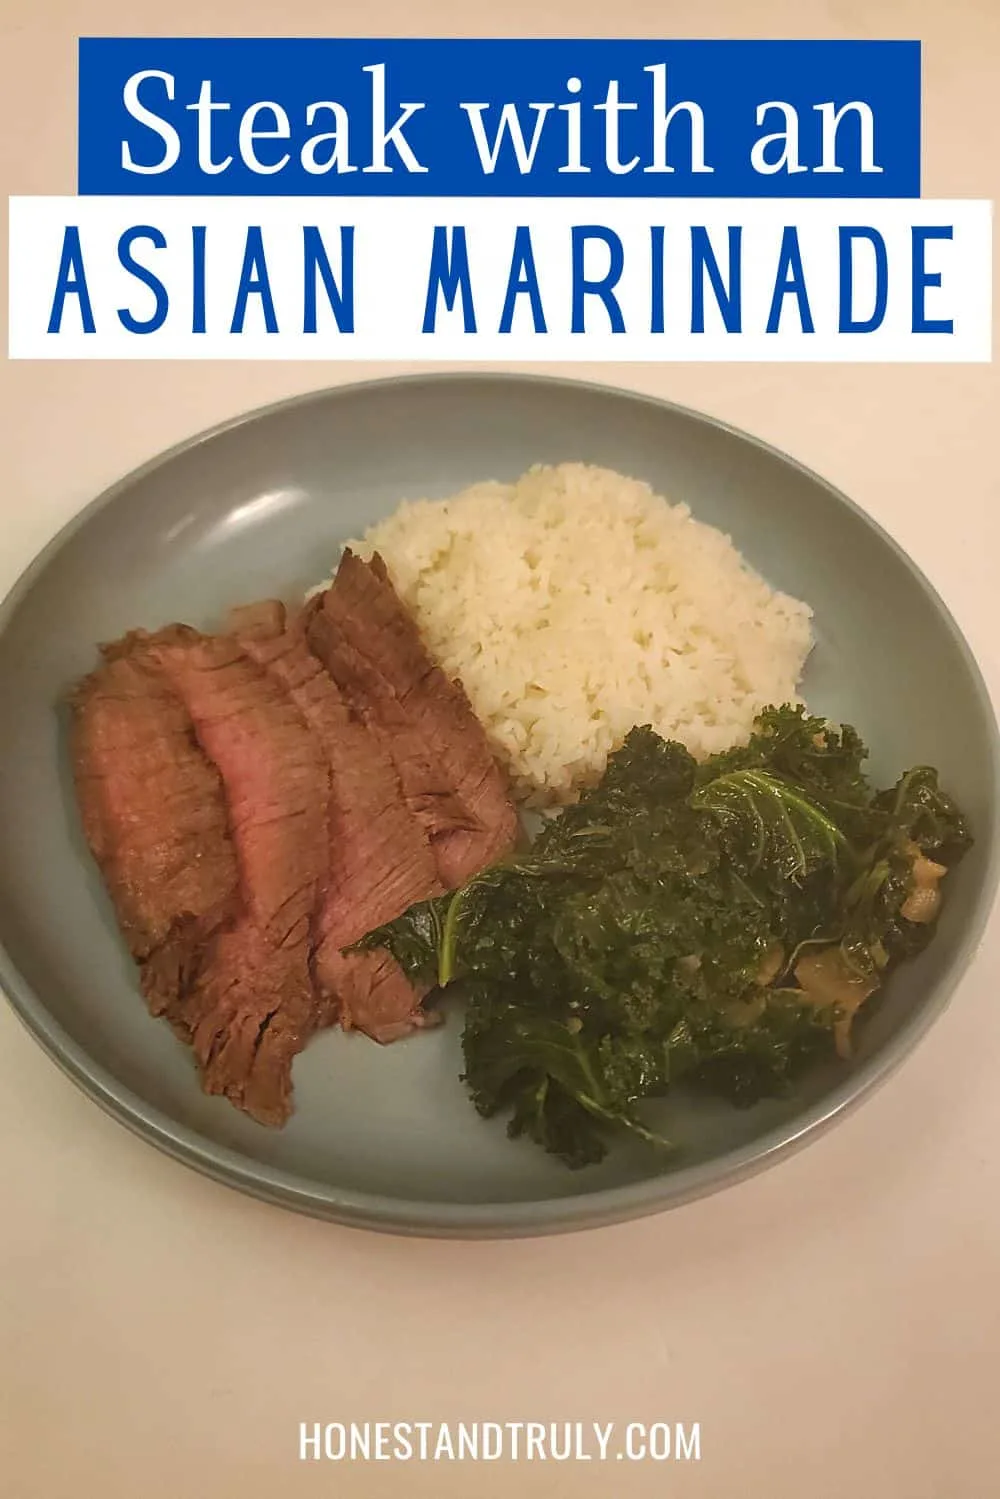 Overheard of plate with sliced Asian marinated steak, greens, and rice with text steak with an Asian marinade.